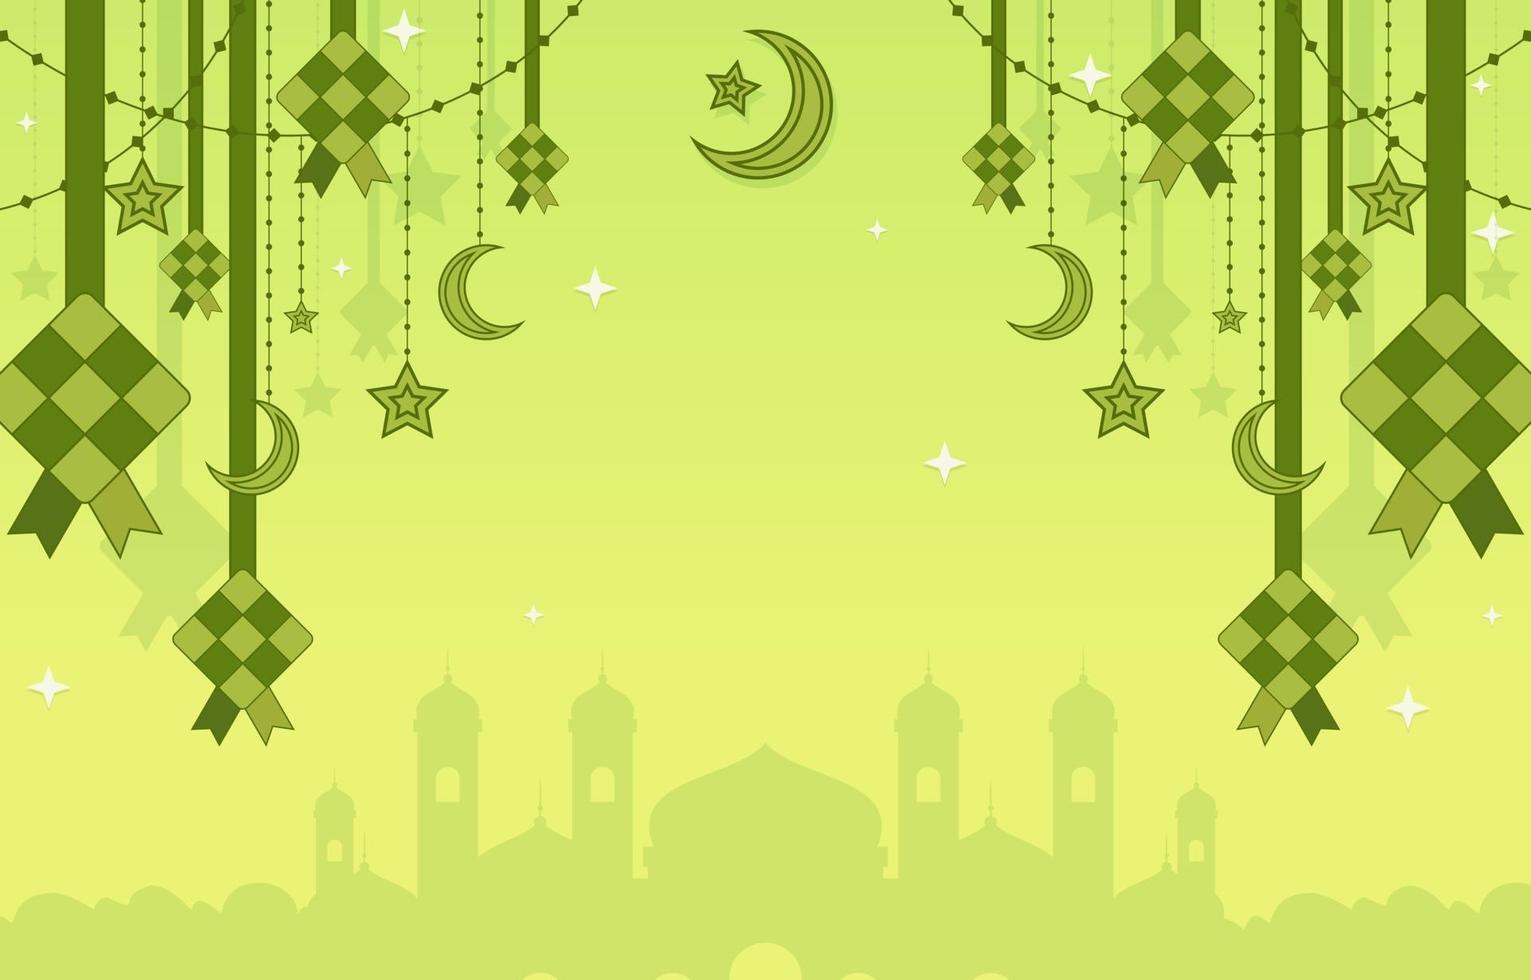 Ketupat Background with Stars vector